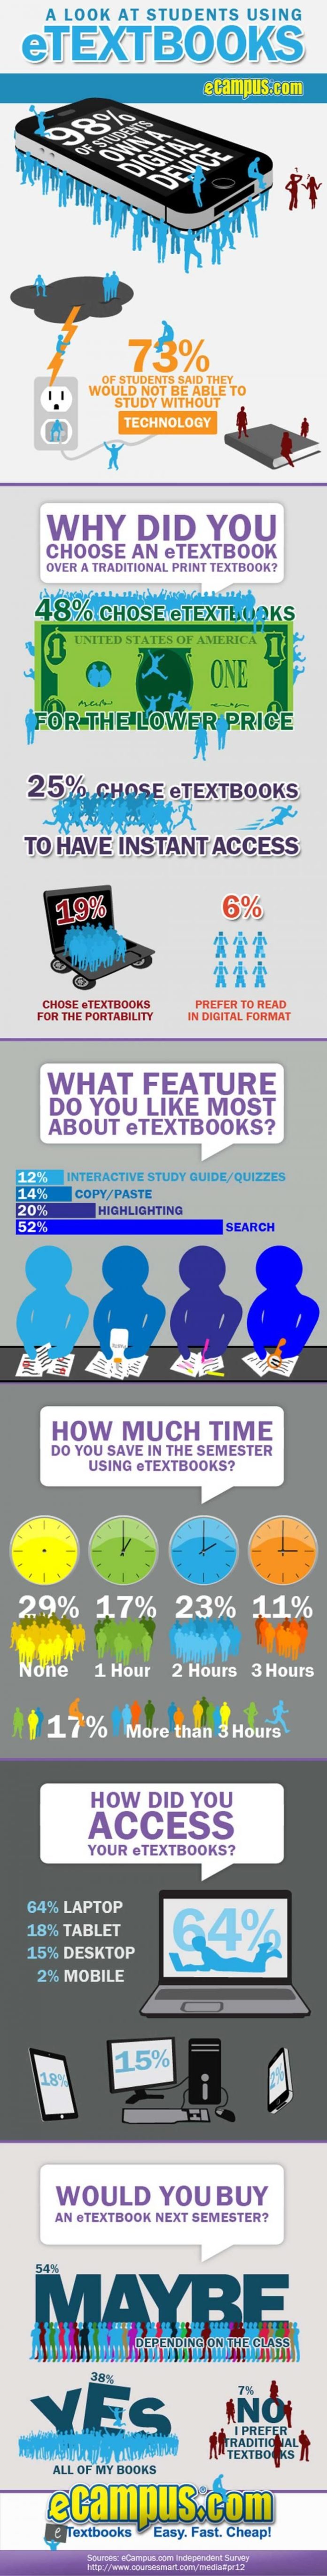 Educational infographic : The battle between e-textbooks and print ...